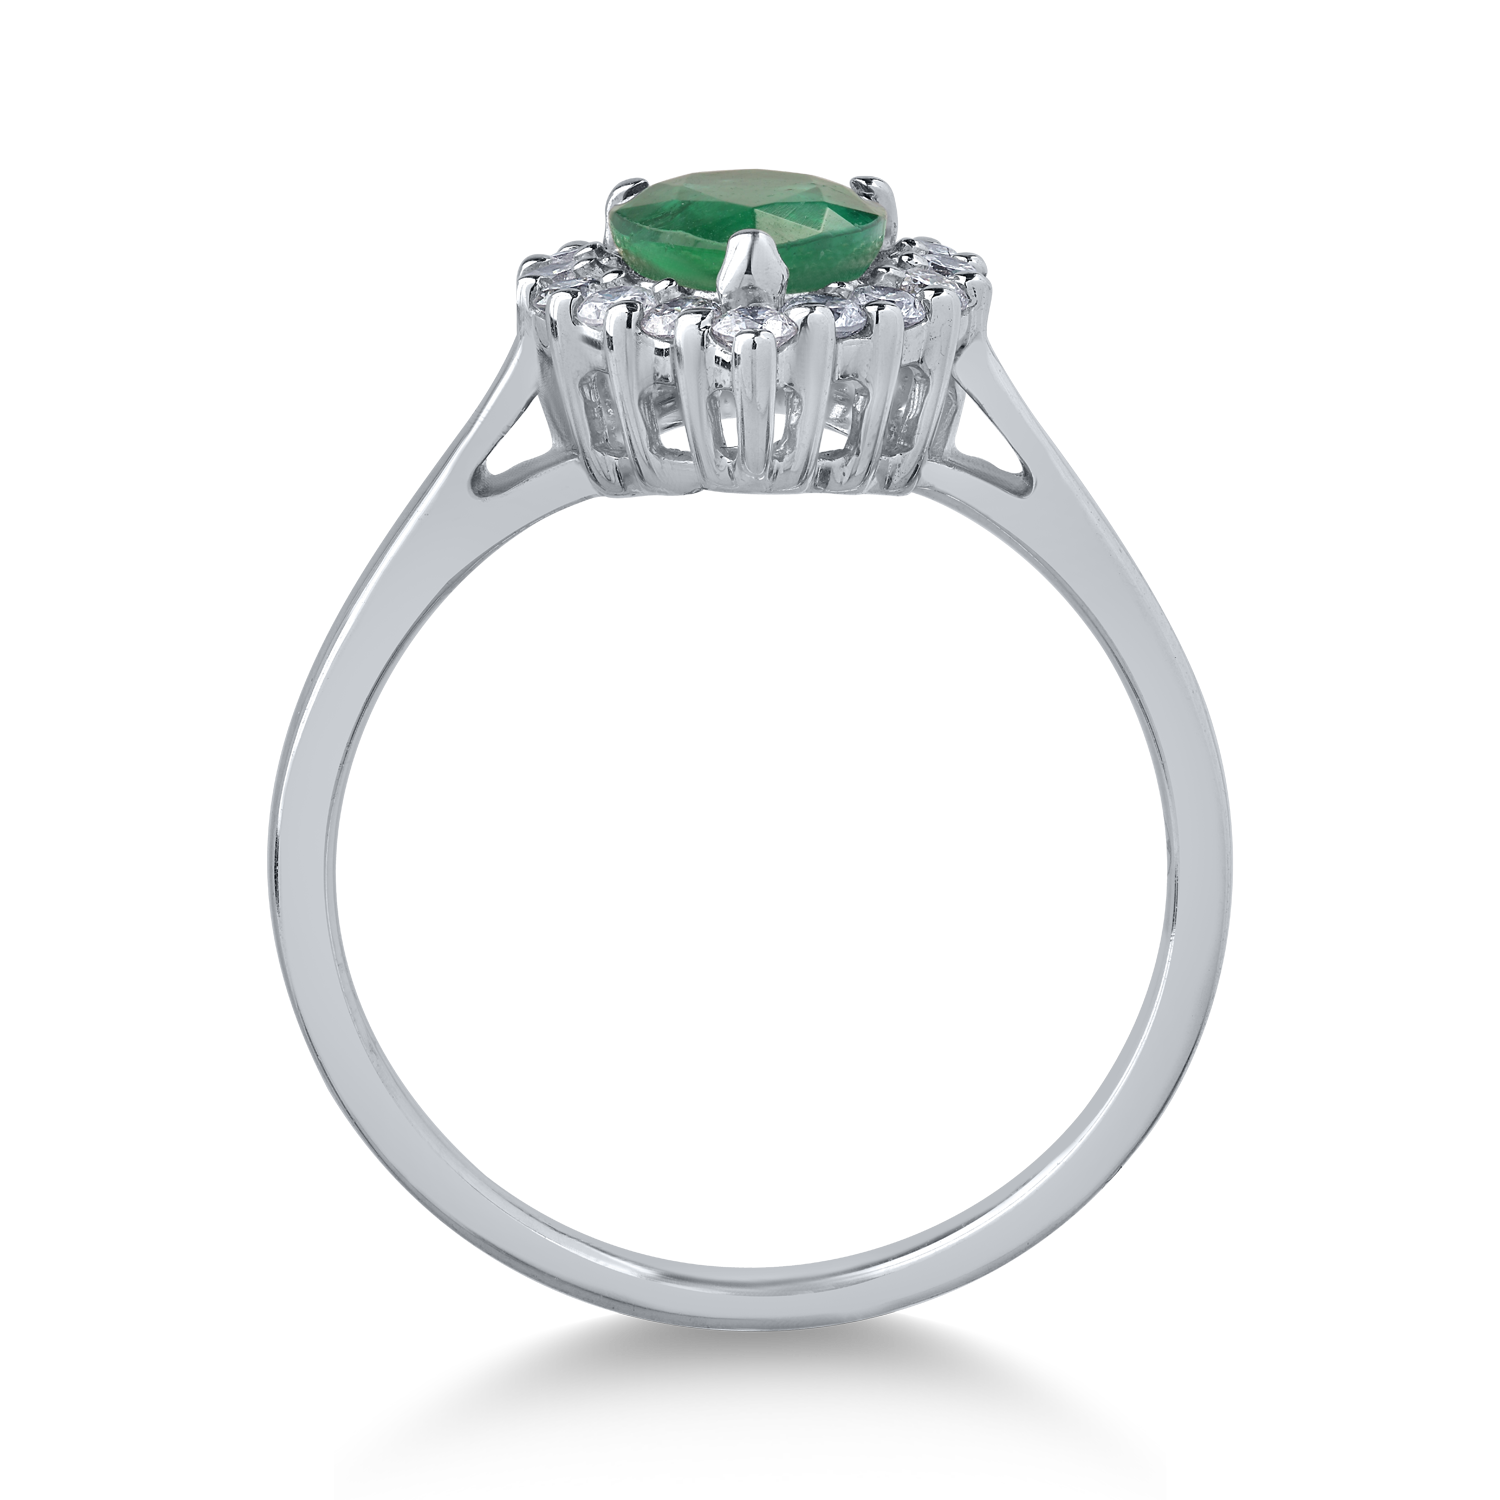 18K white gold ring with 0.91ct emerald and 0.31ct diamonds